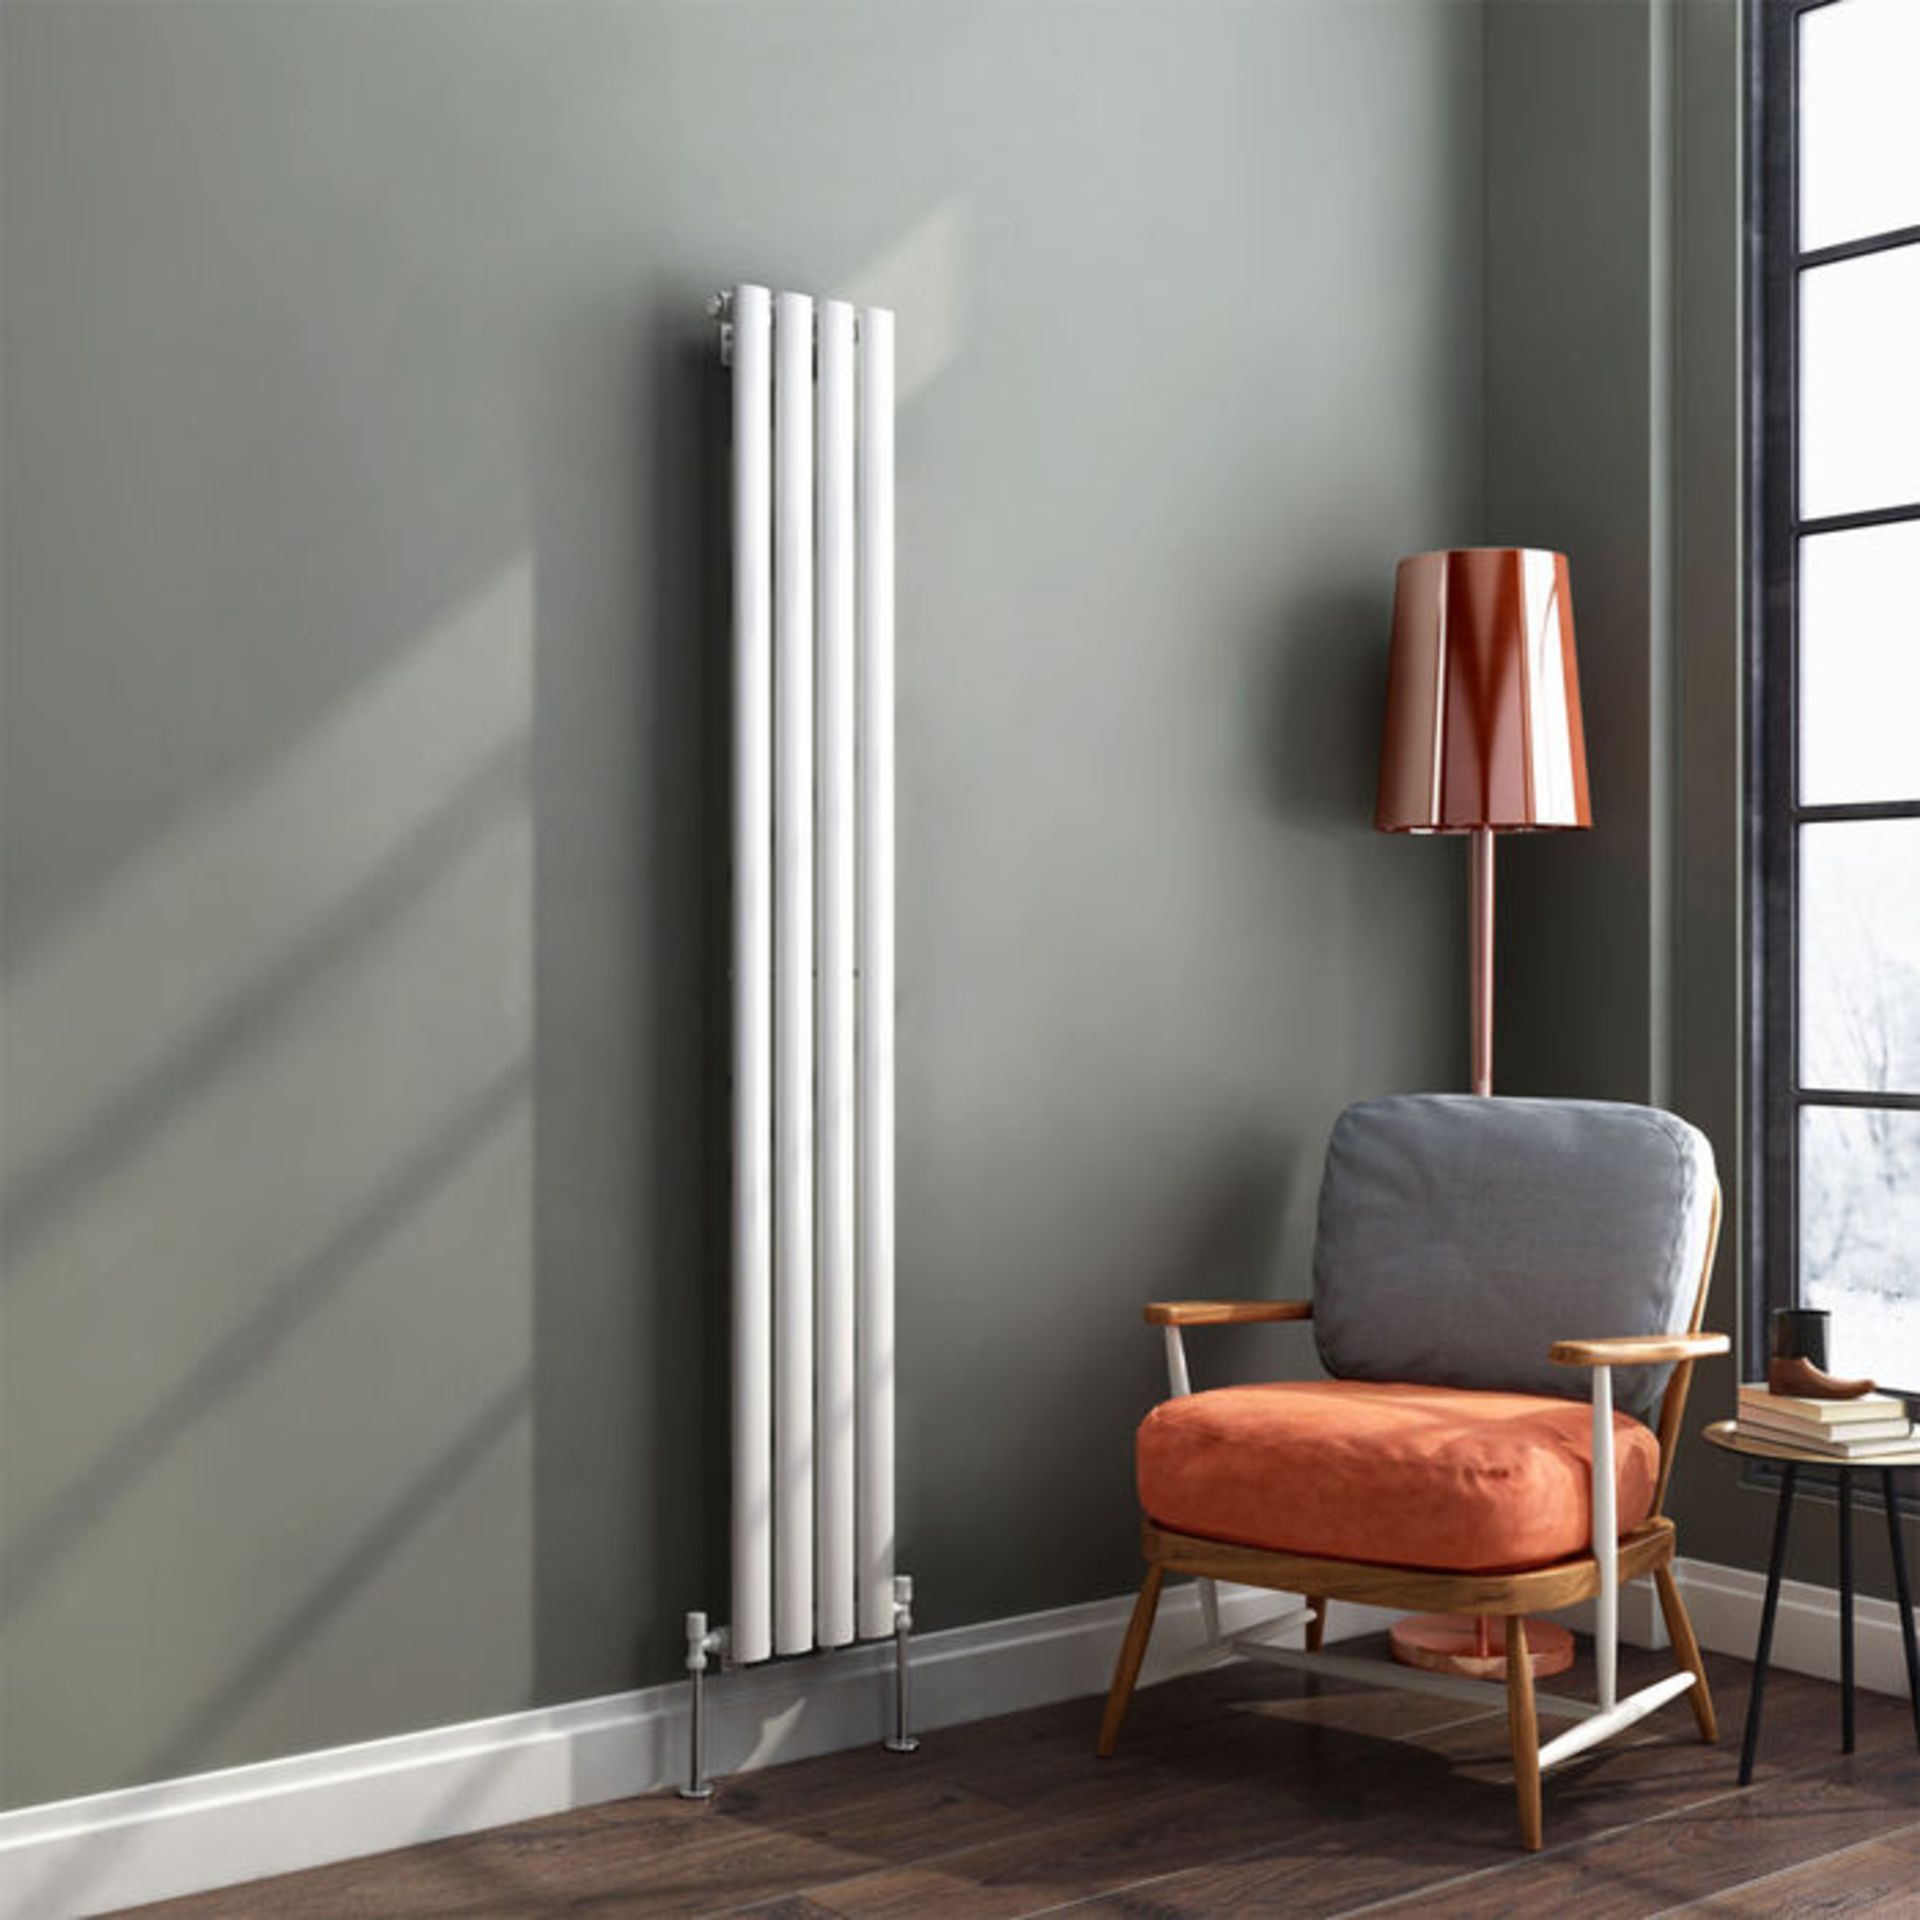 (G49) 1600x240mm Gloss White Single Oval Tube Vertical Radiator. Low carbon steel, high quality - Image 2 of 3